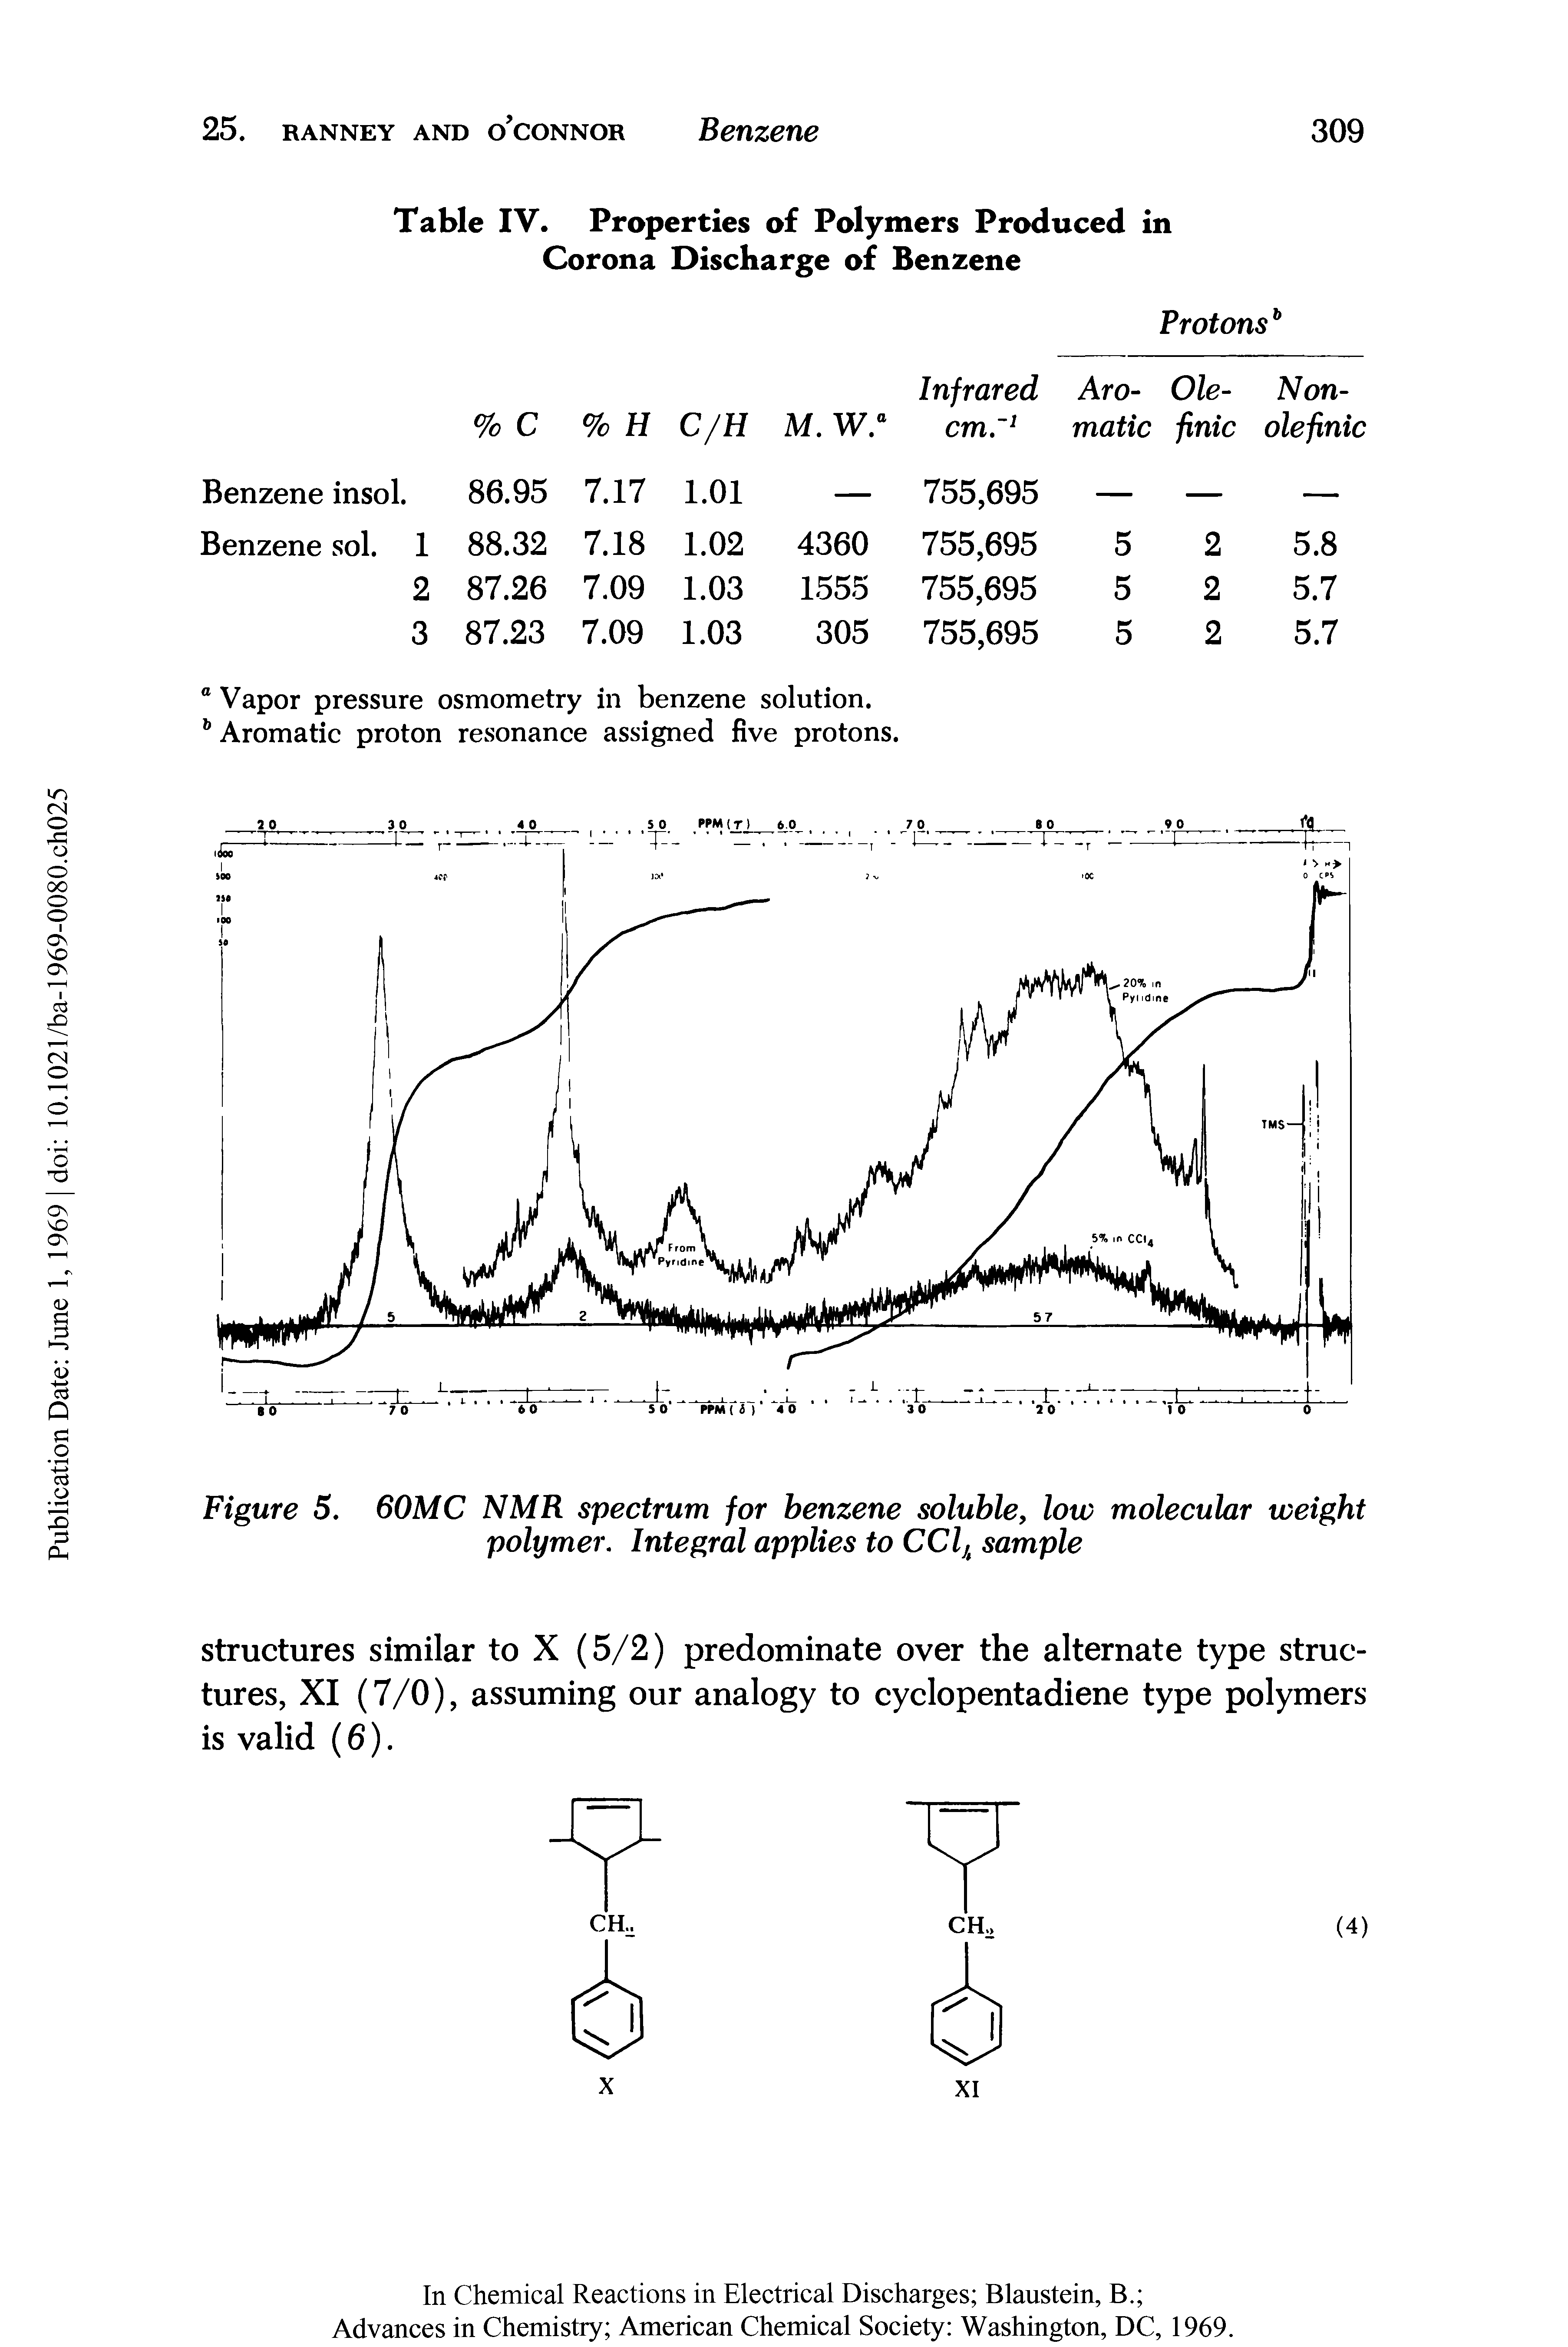 Figure 5. 60MC NMR spectrum for benzene soluble, low molecular weight polymer. Integral applies to CClh sample...